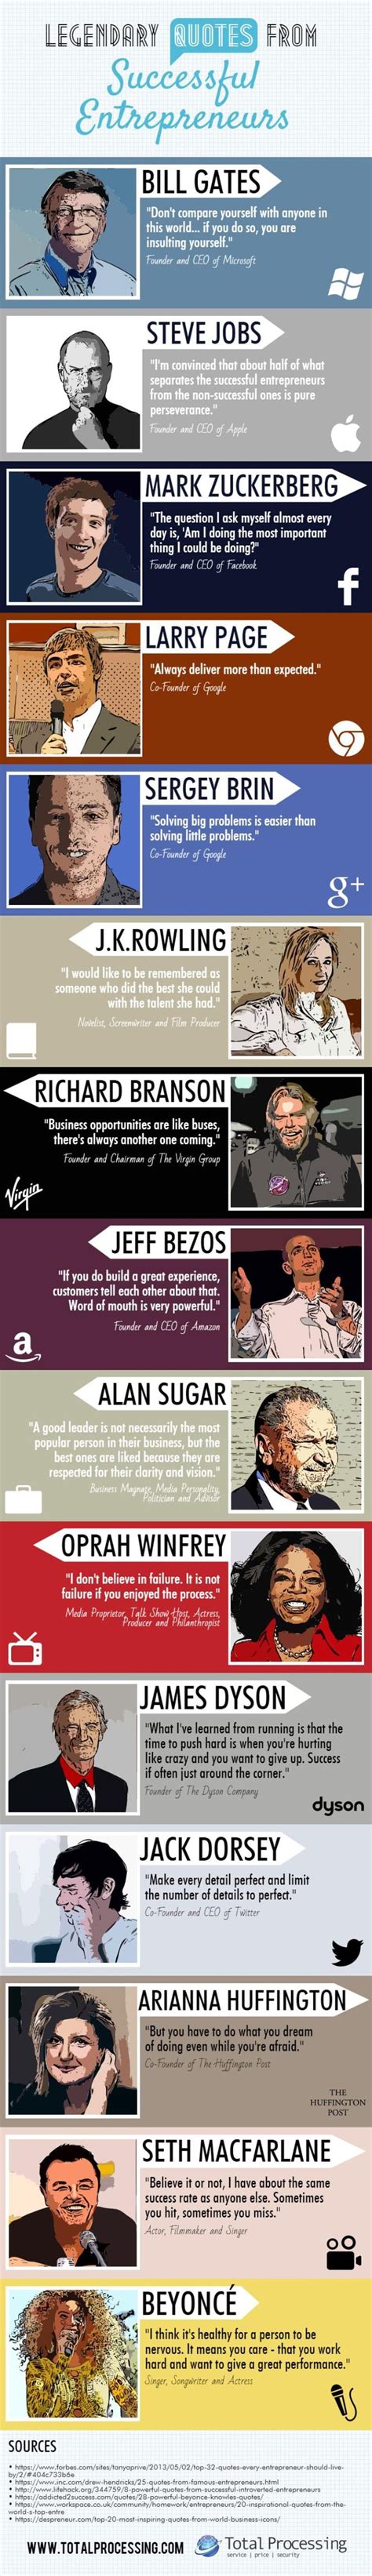 15 Motivational Quotes From Successful Entrepreneurs Infographic